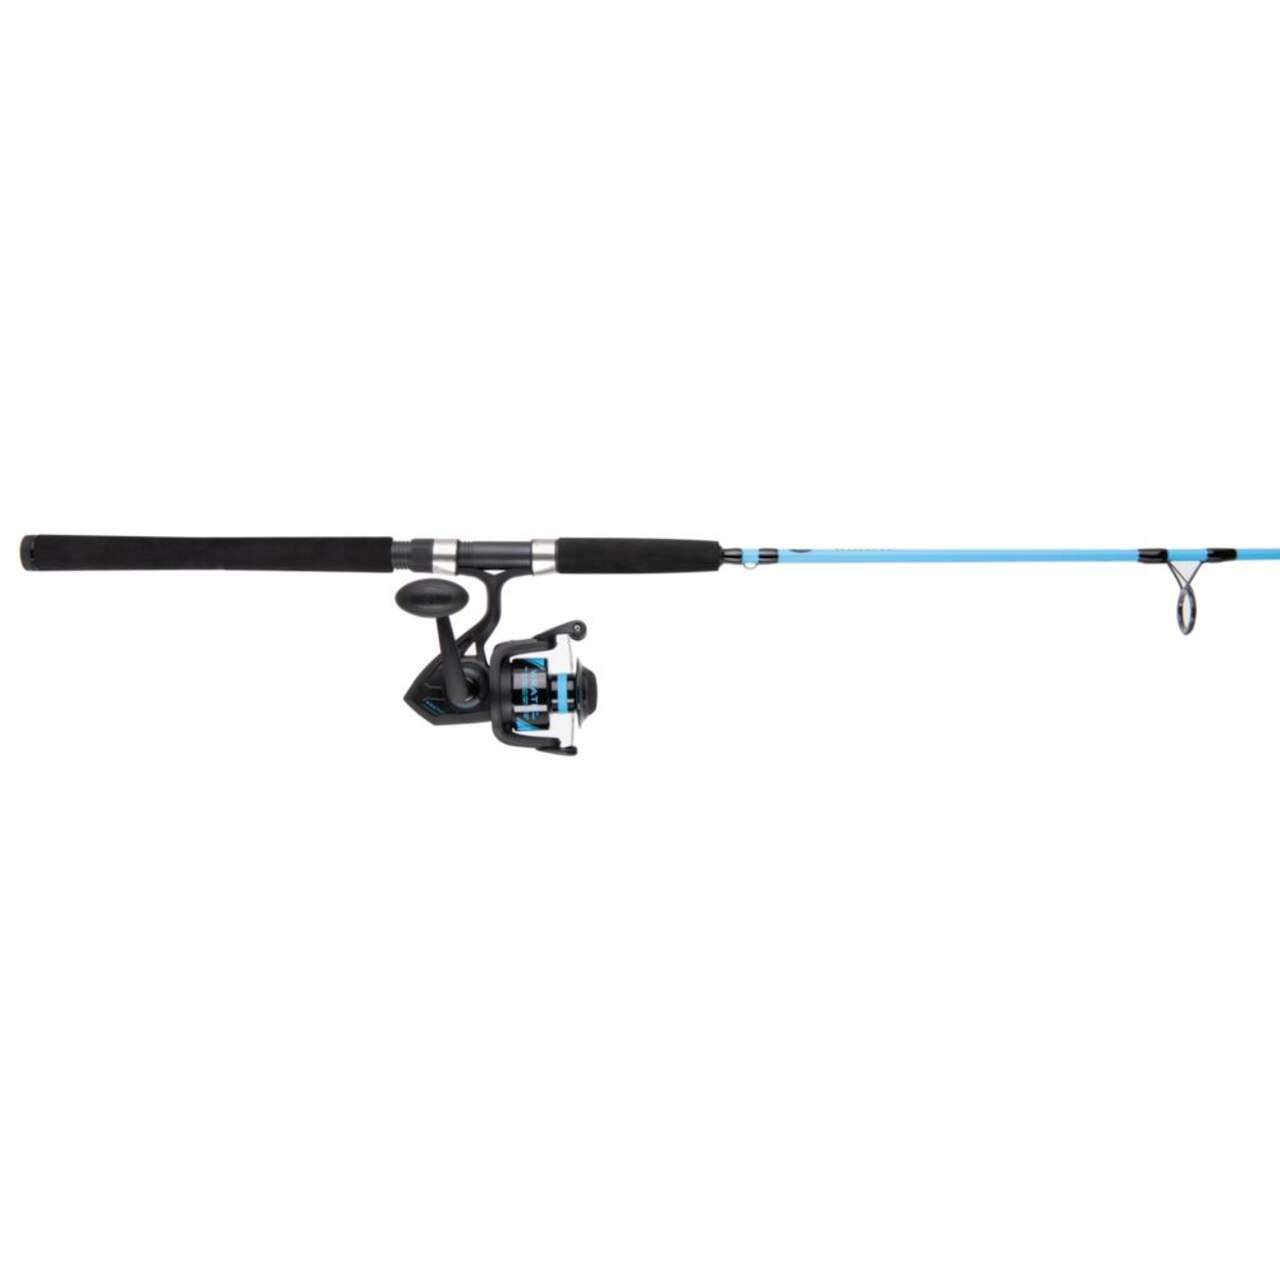 Maco's custom crafted saltwater rod and penn reel - sporting goods